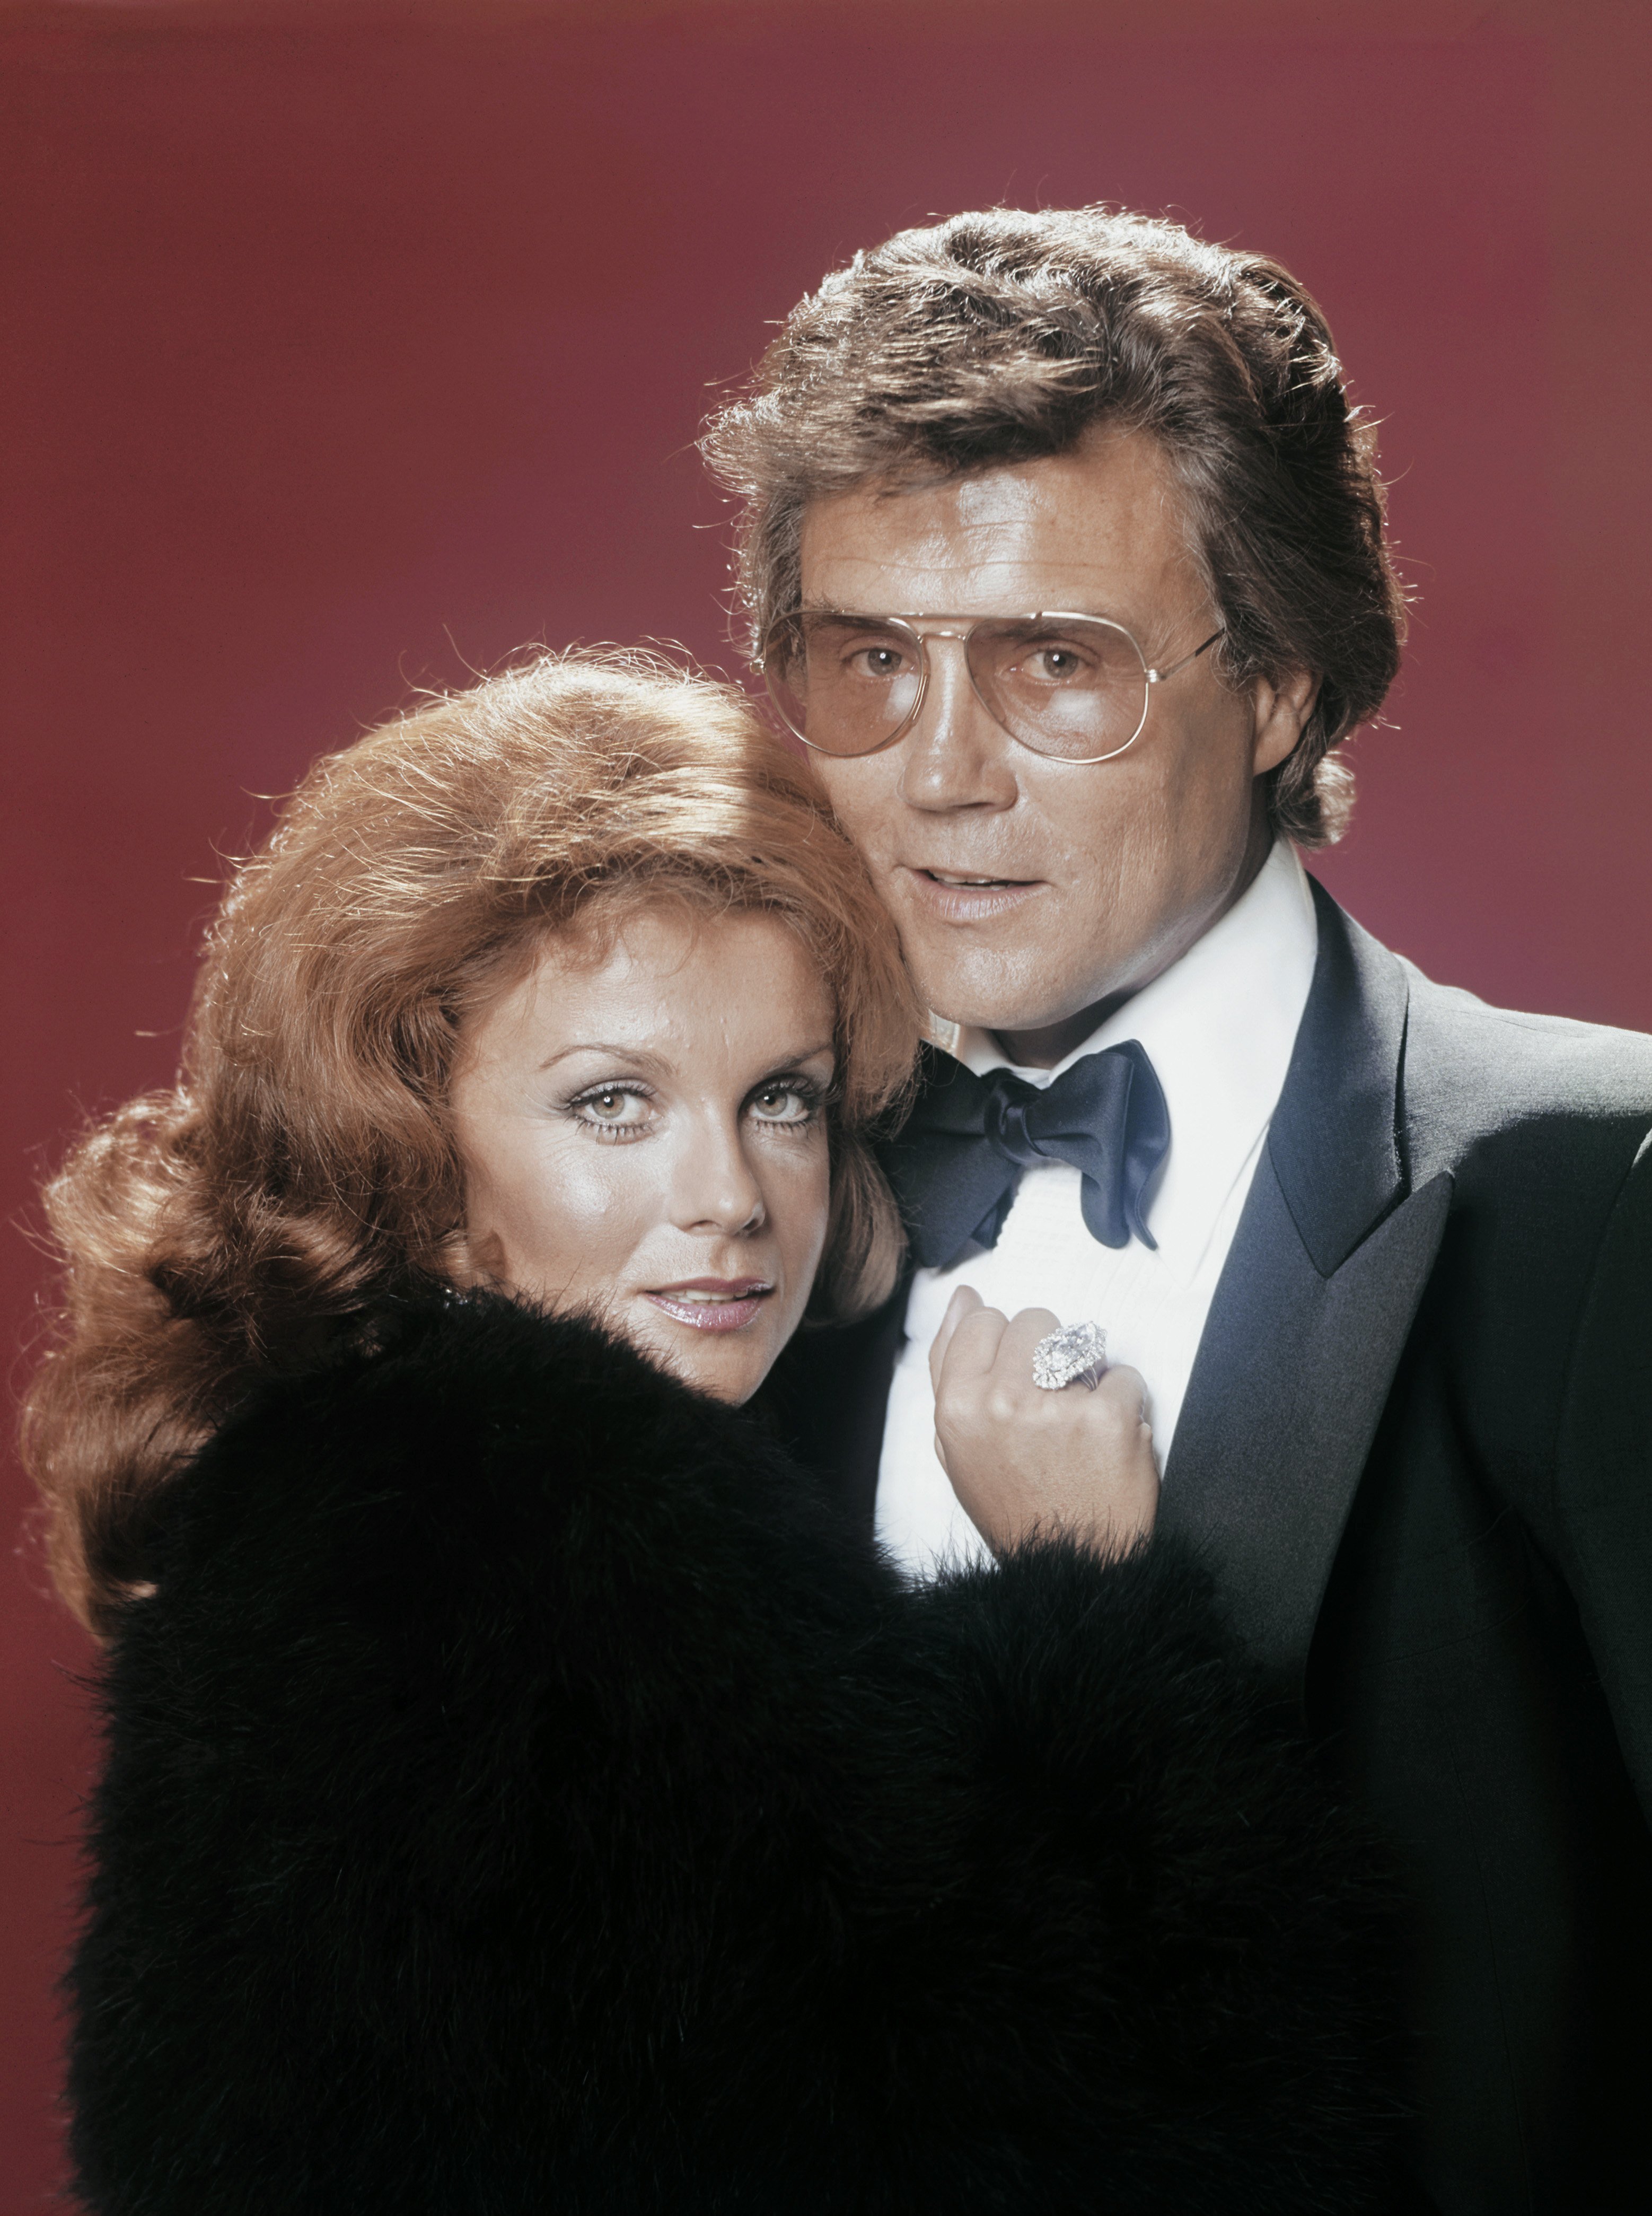 Ann-Margret and husband Roger Smith pose for a photo in 1975 in Los Angeles, California. / Source: Getty Images